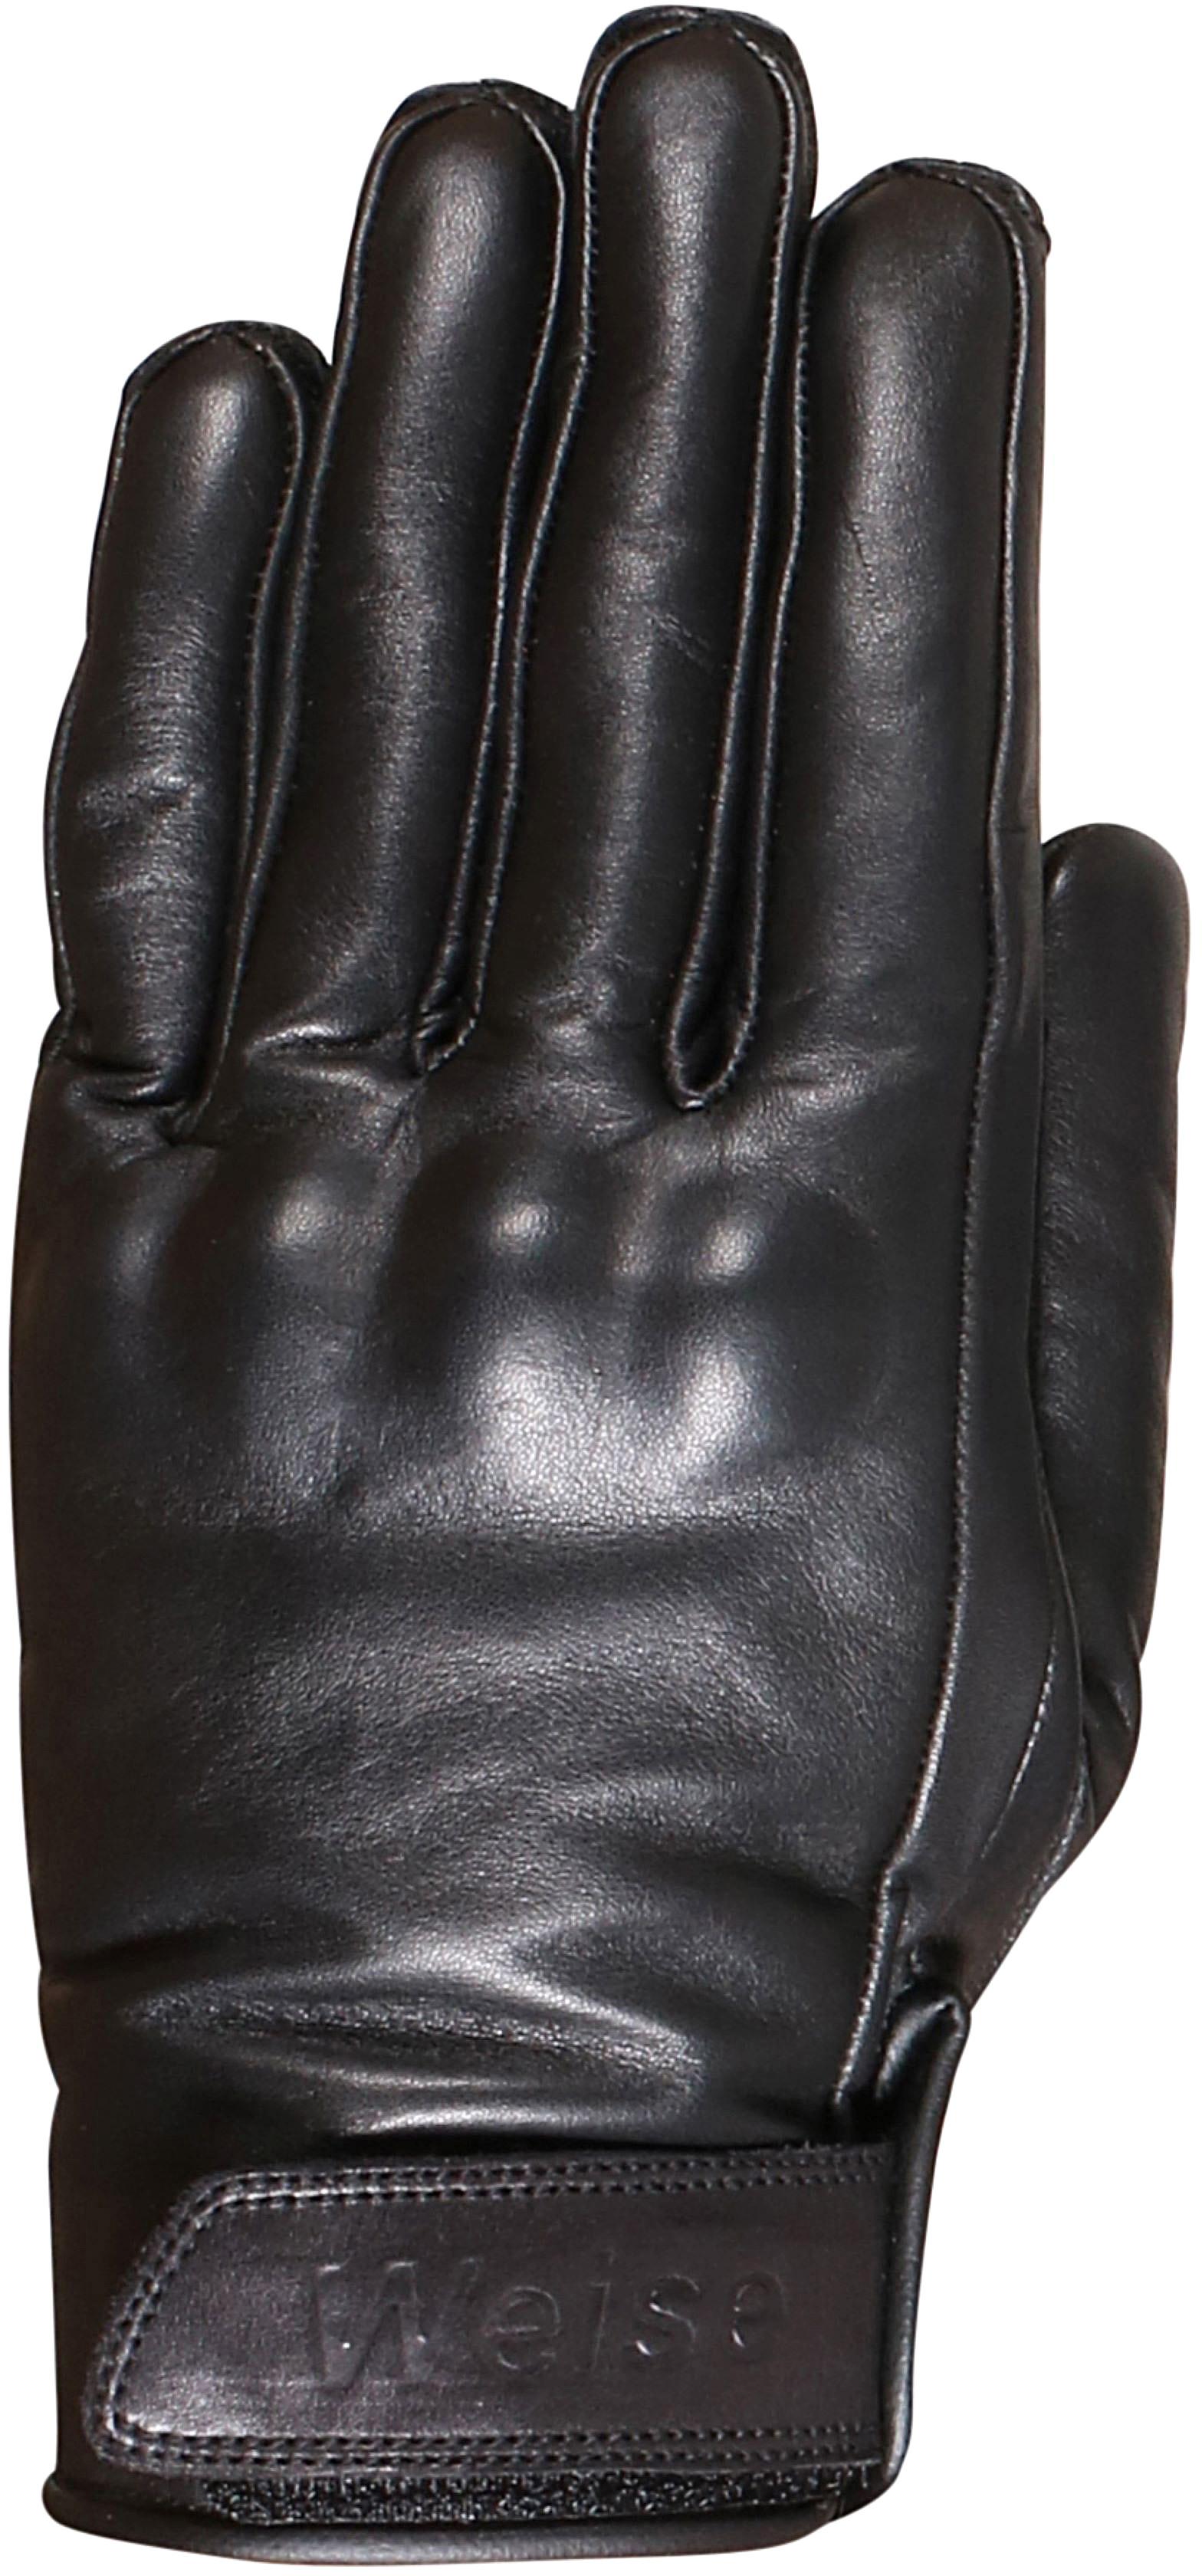 Weise Tilly Womens Motorcycle Gloves - Black, L